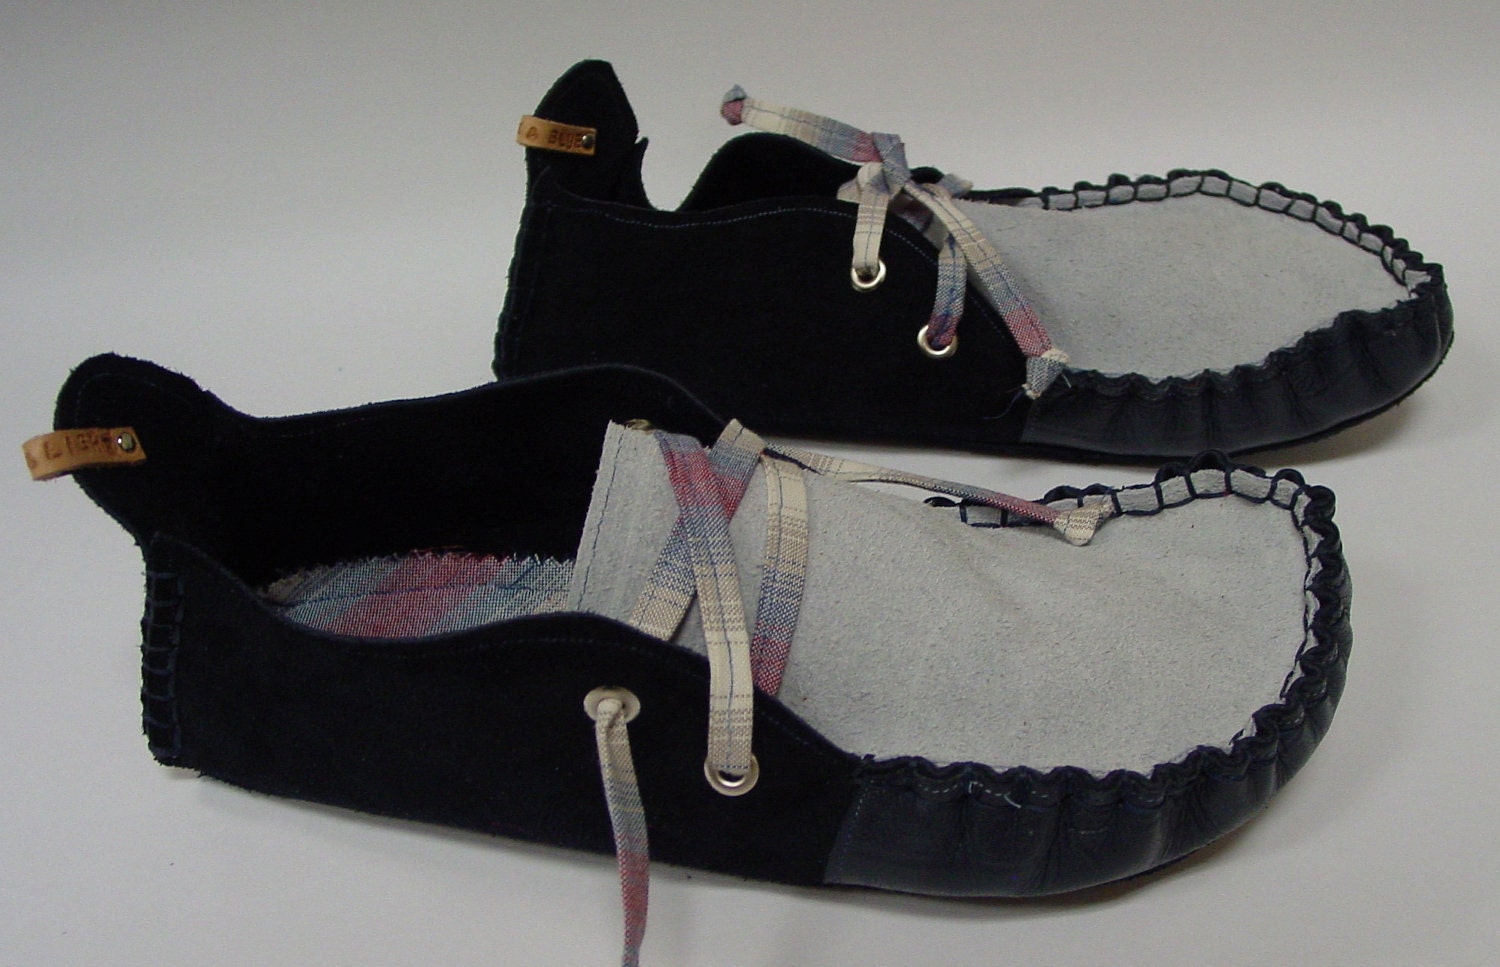 23 Tribes hand made moccasins. Blue Suede Shoes